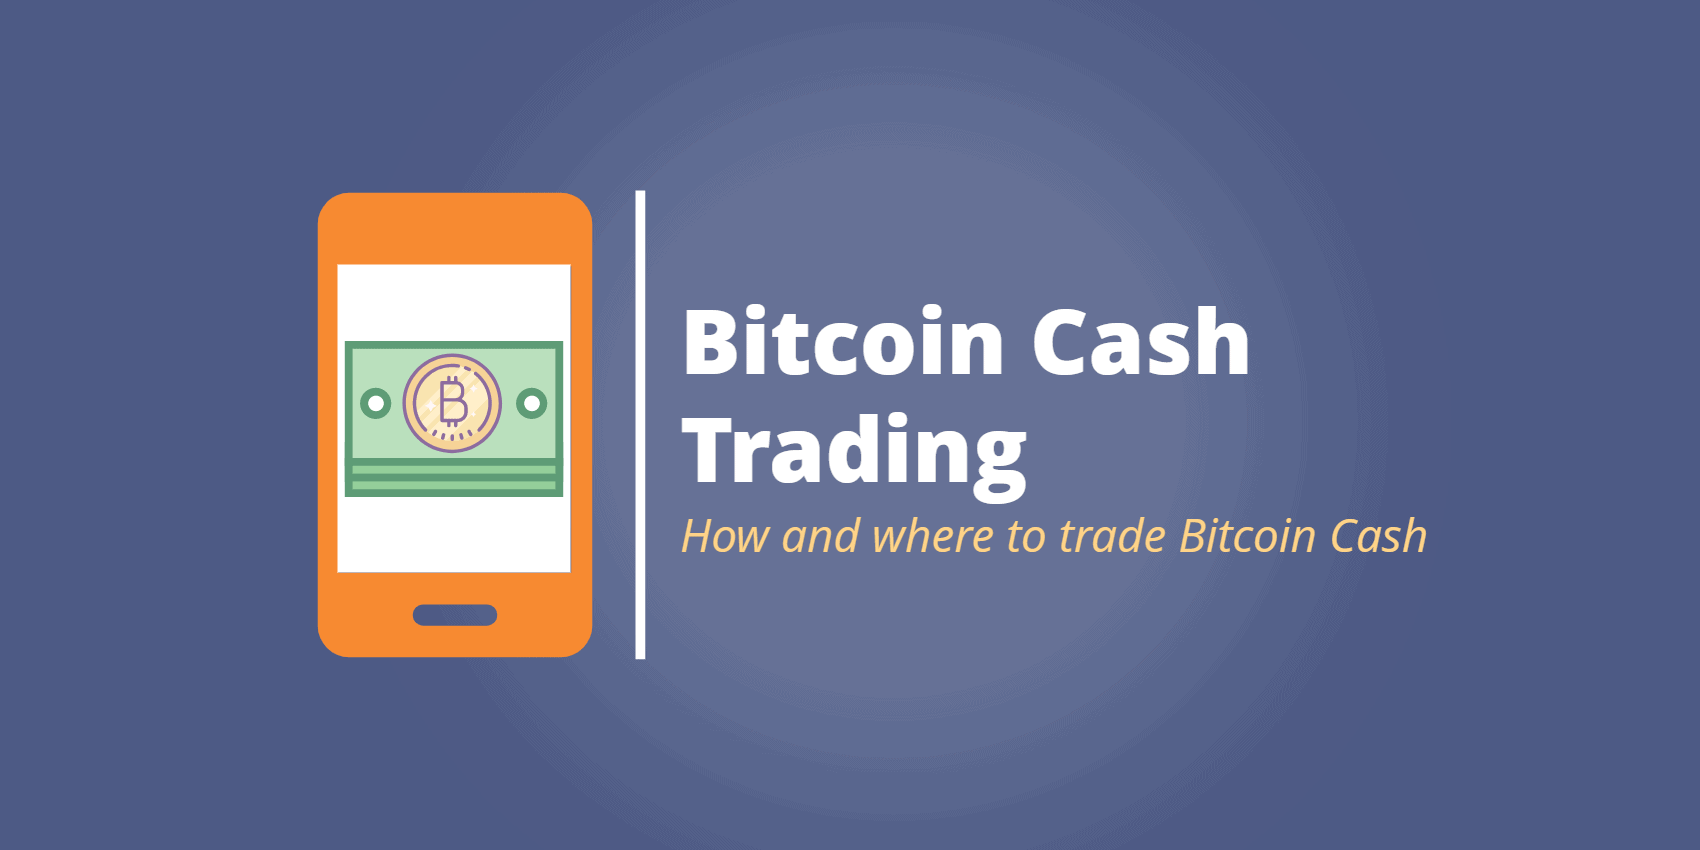 Where to trade bitcoin cash ethereum or ripple which is better